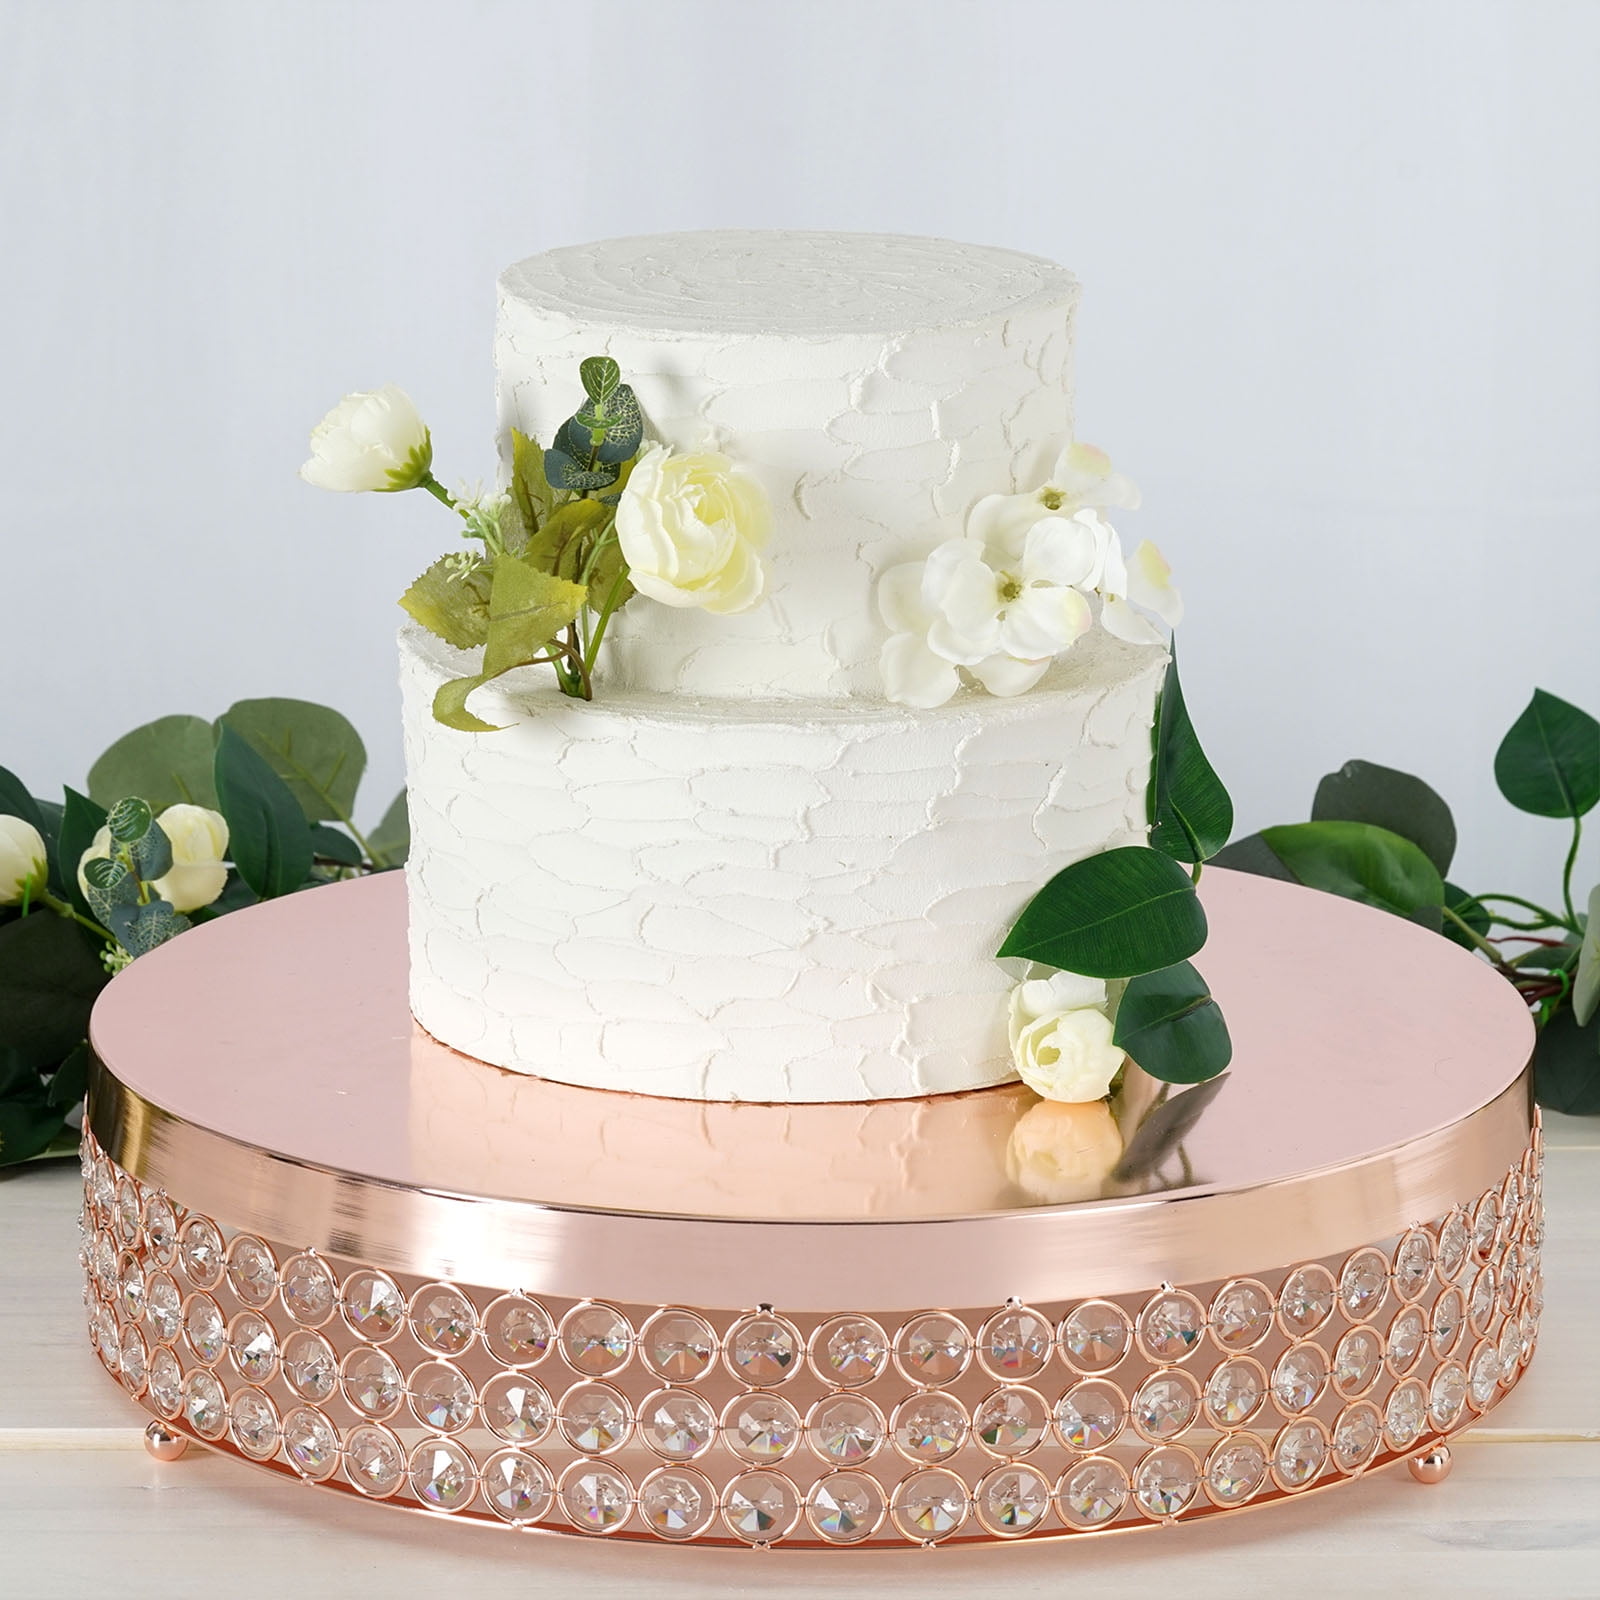 13.5" wide Silver Metal Cake Stand with Crystal Beads Wedding Birthday Party 